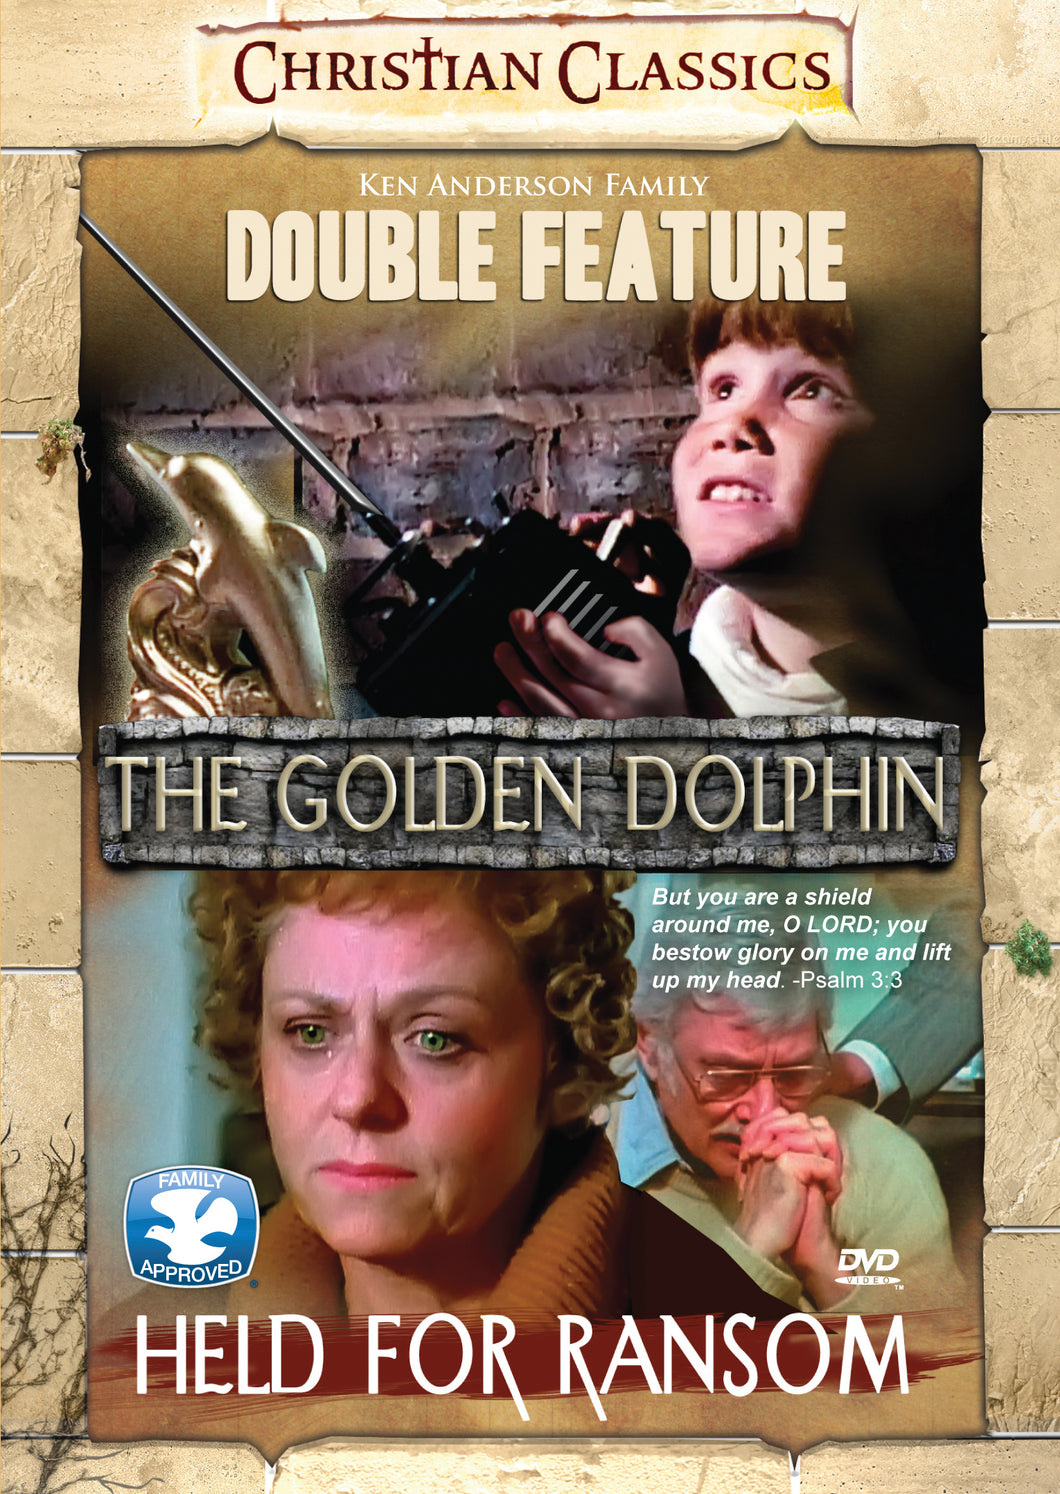 Christian Classics Double Feature (Held For Ransom & Golden Dolphin) (DVD)